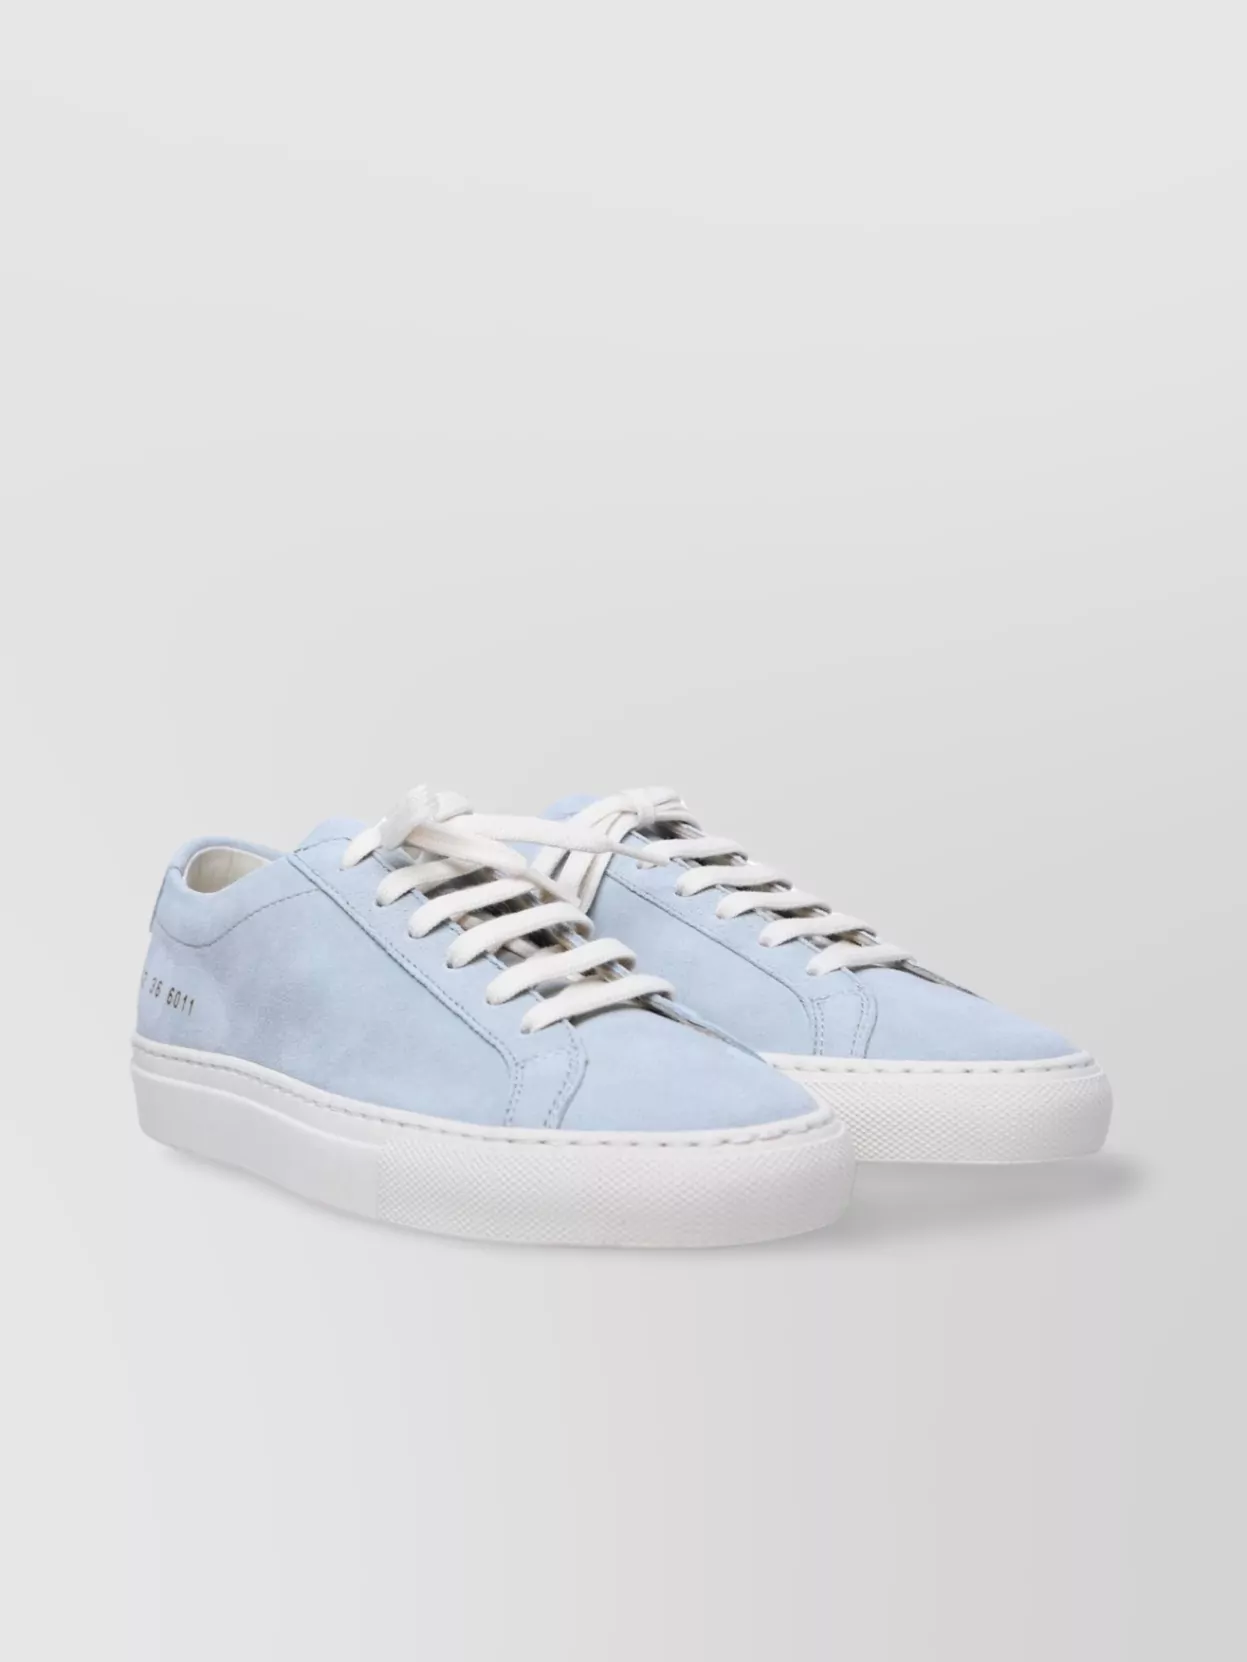 Common Projects 'achilles Contrast' Suede Sneakers